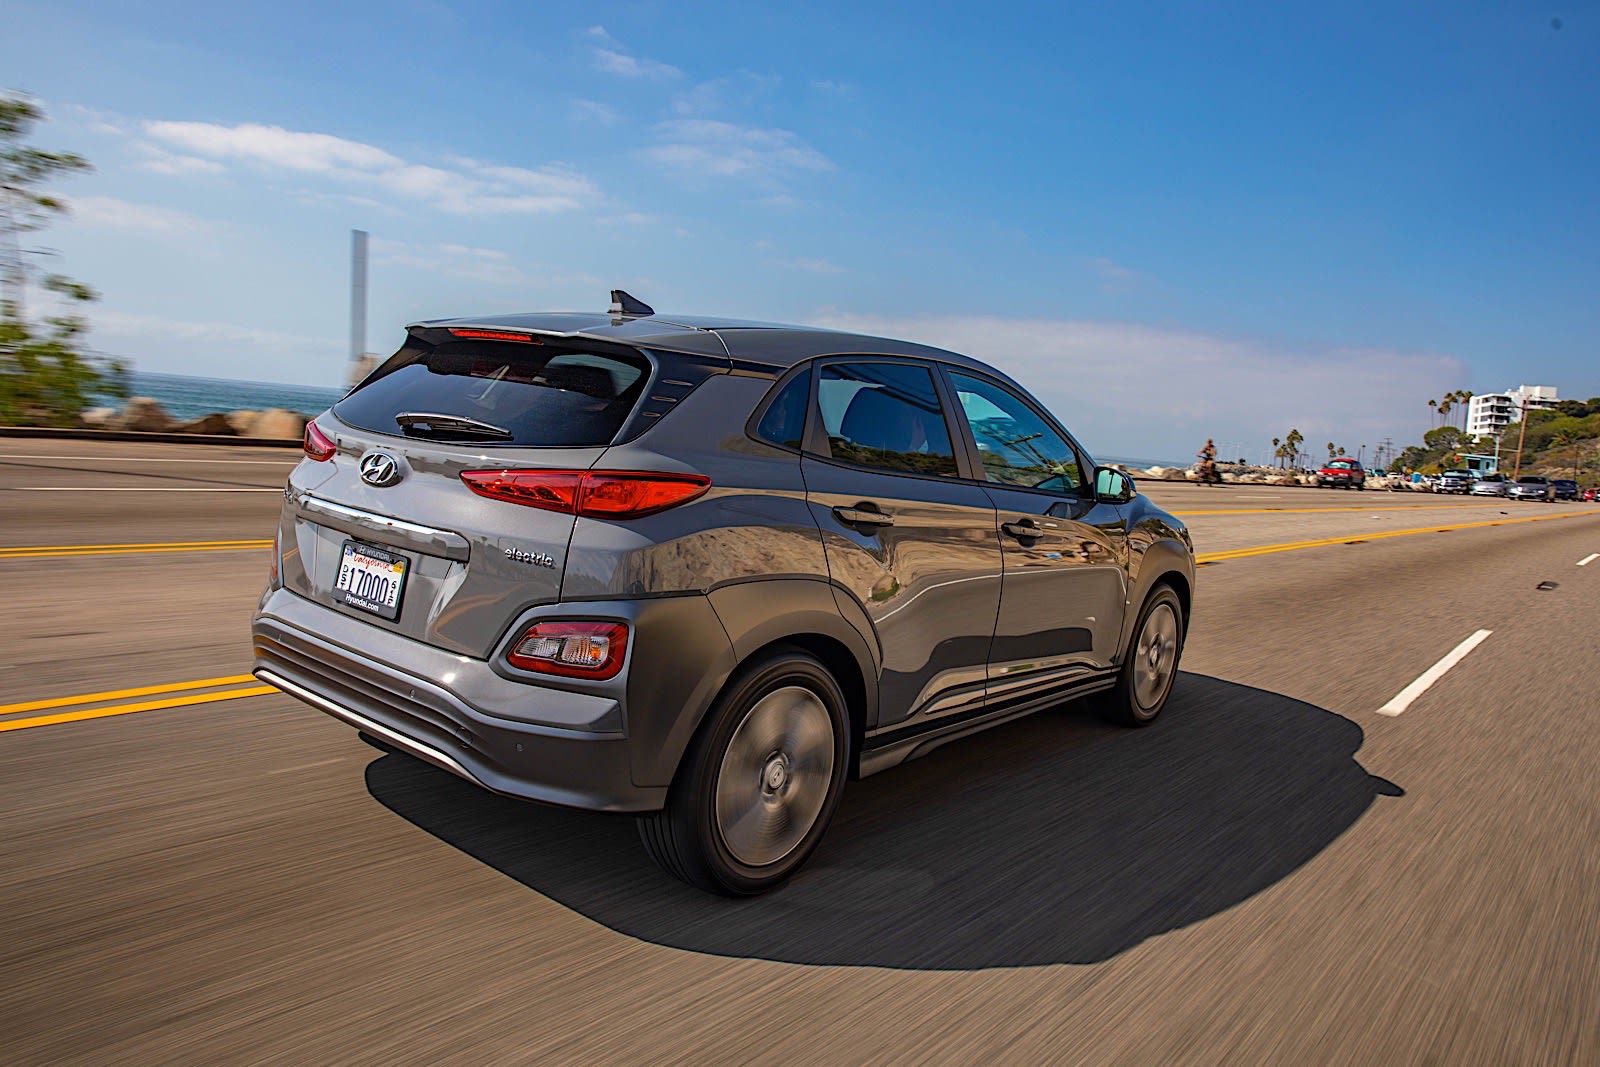 Hyundai's Kona Electric is ready to hit the road